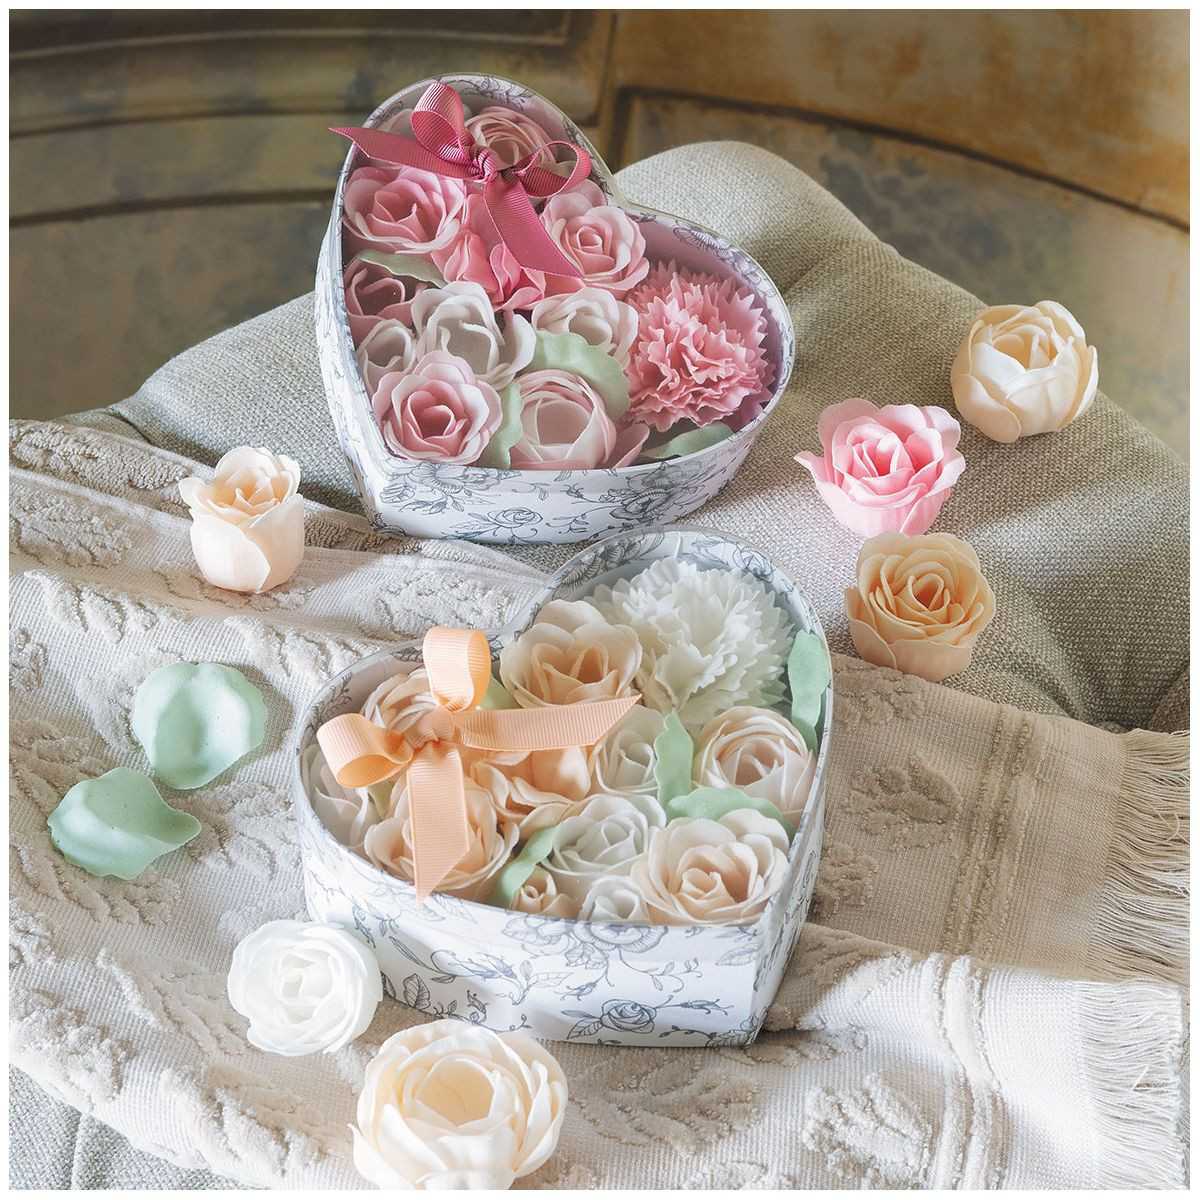 Category Wellness boxes - Bougie personnalisée : Heart Box Bouquet Parterre of Nude and White Soap Flowers - Parfum Rose , He...